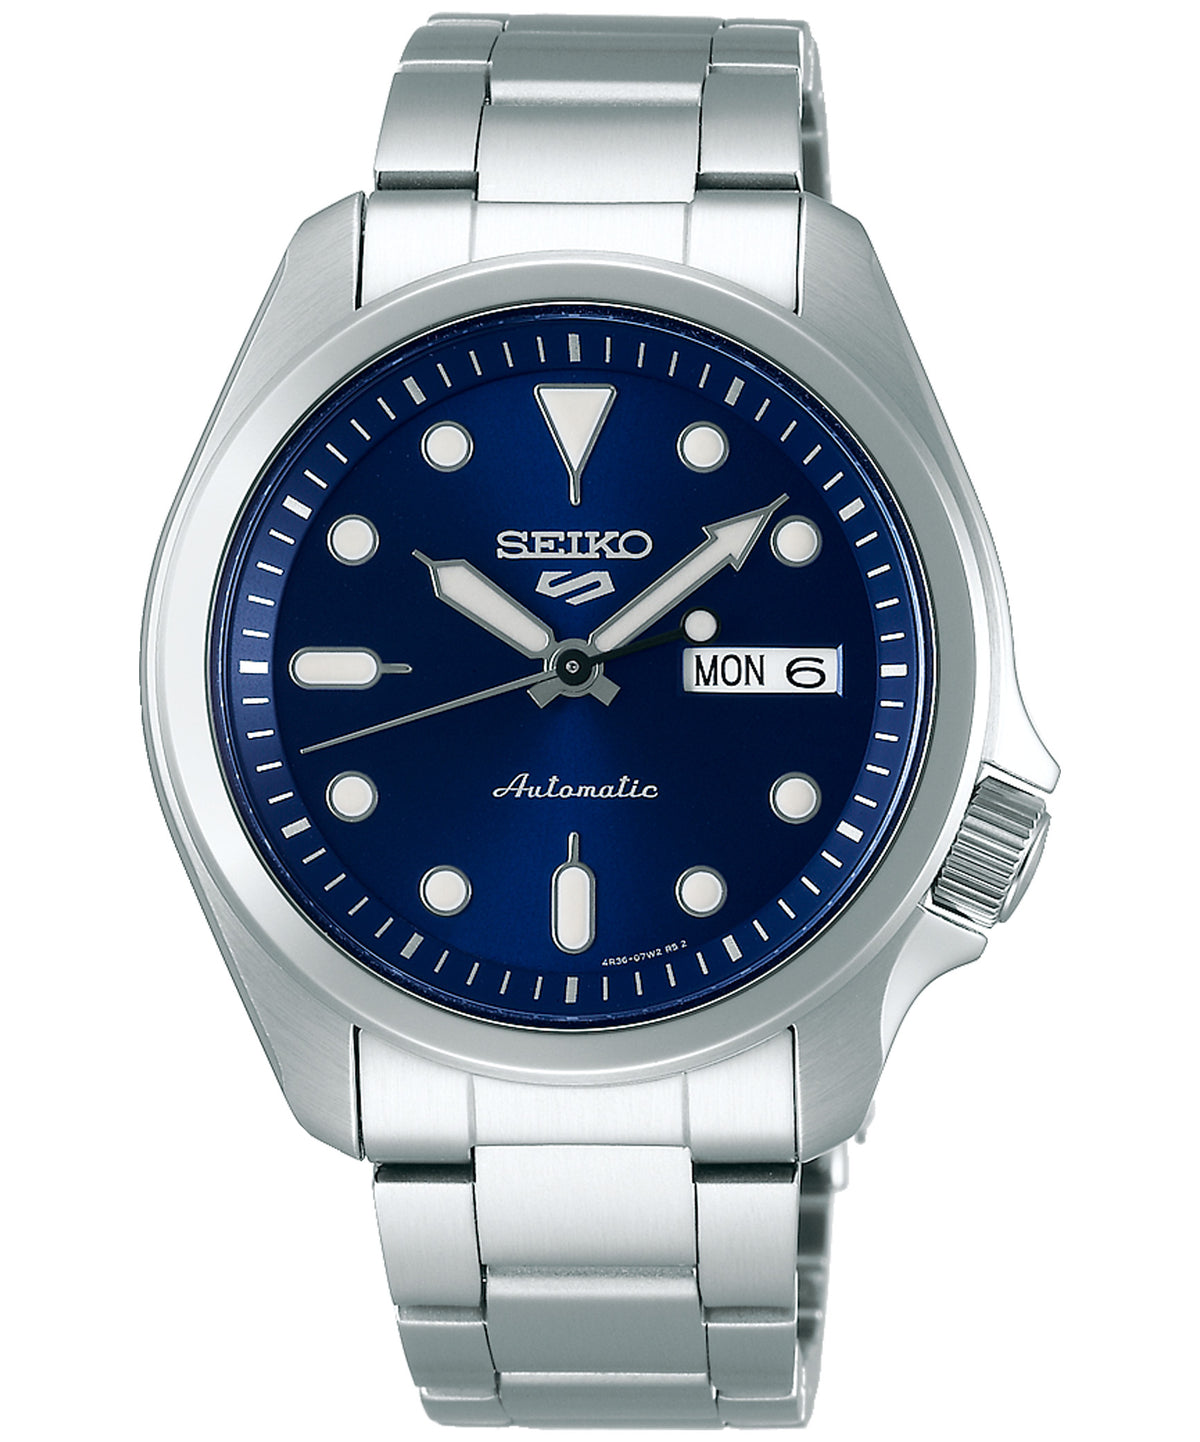 Seiko Men's Sports Mechanical Watch Analog, Blue Dial Silver Stainless Band, SRPE53K